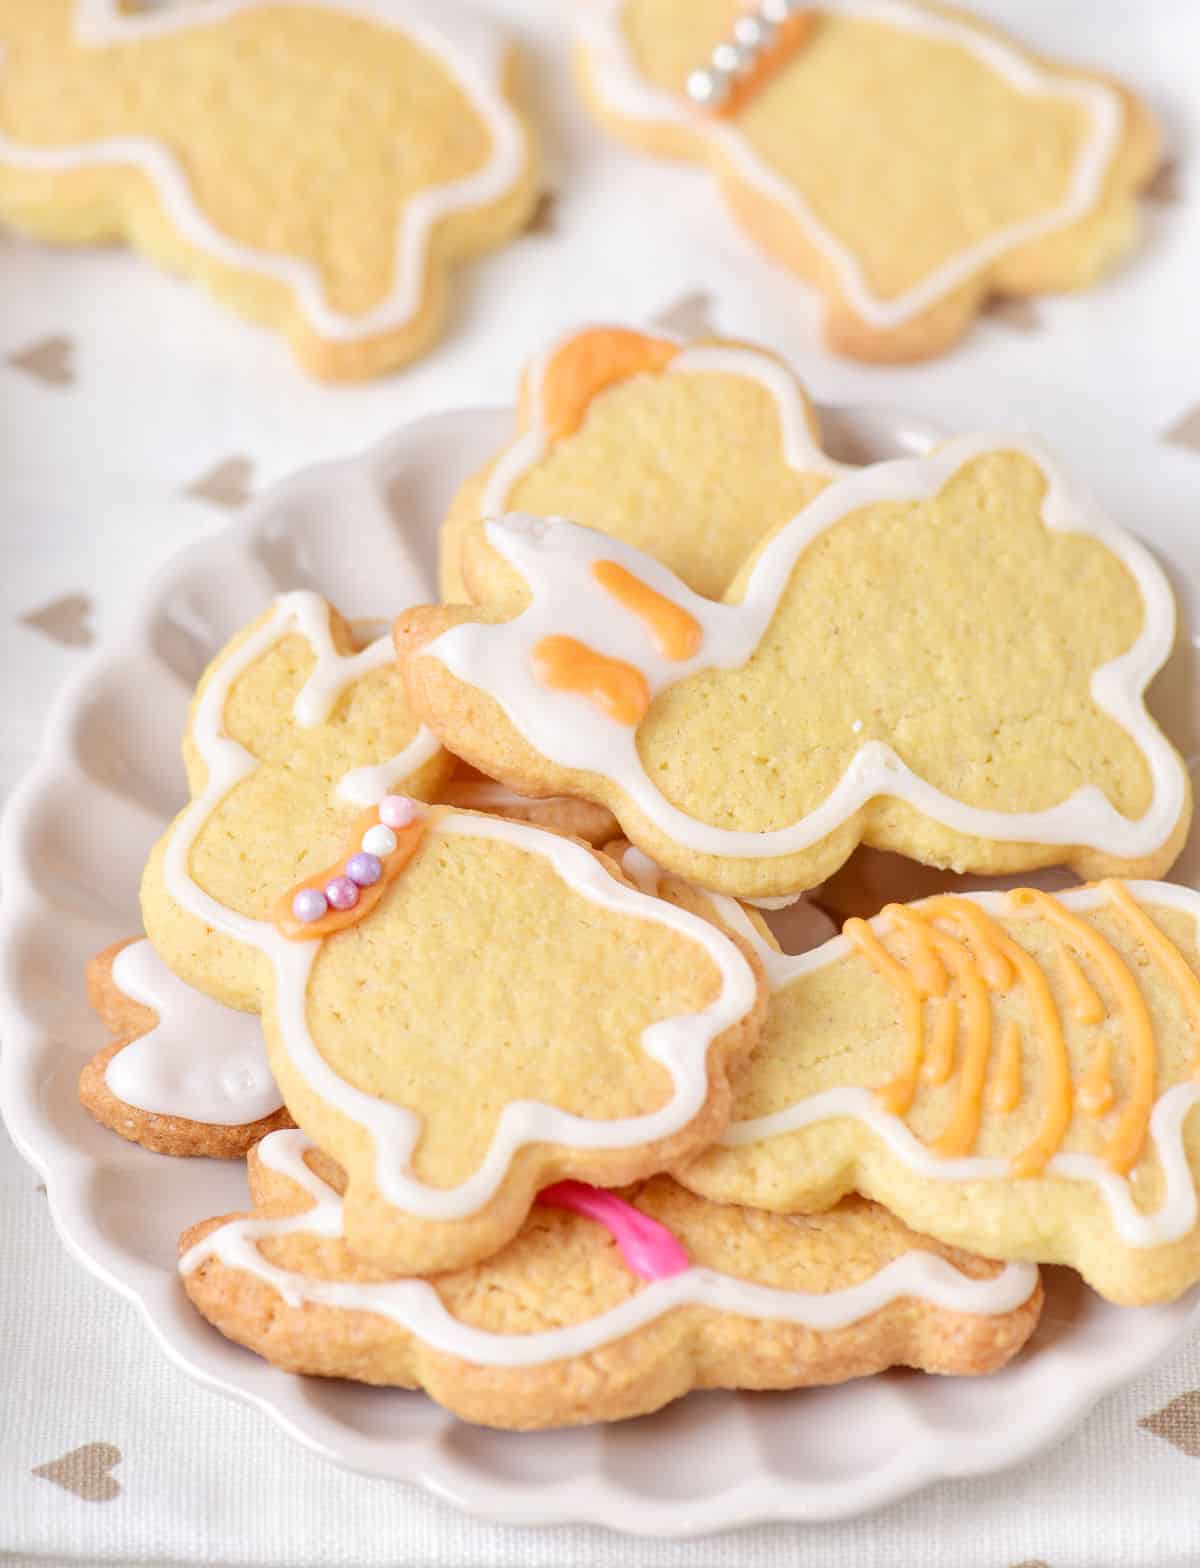 White plate with a pile of white and orange glazed bunny cookies. White surface with grey hearts.